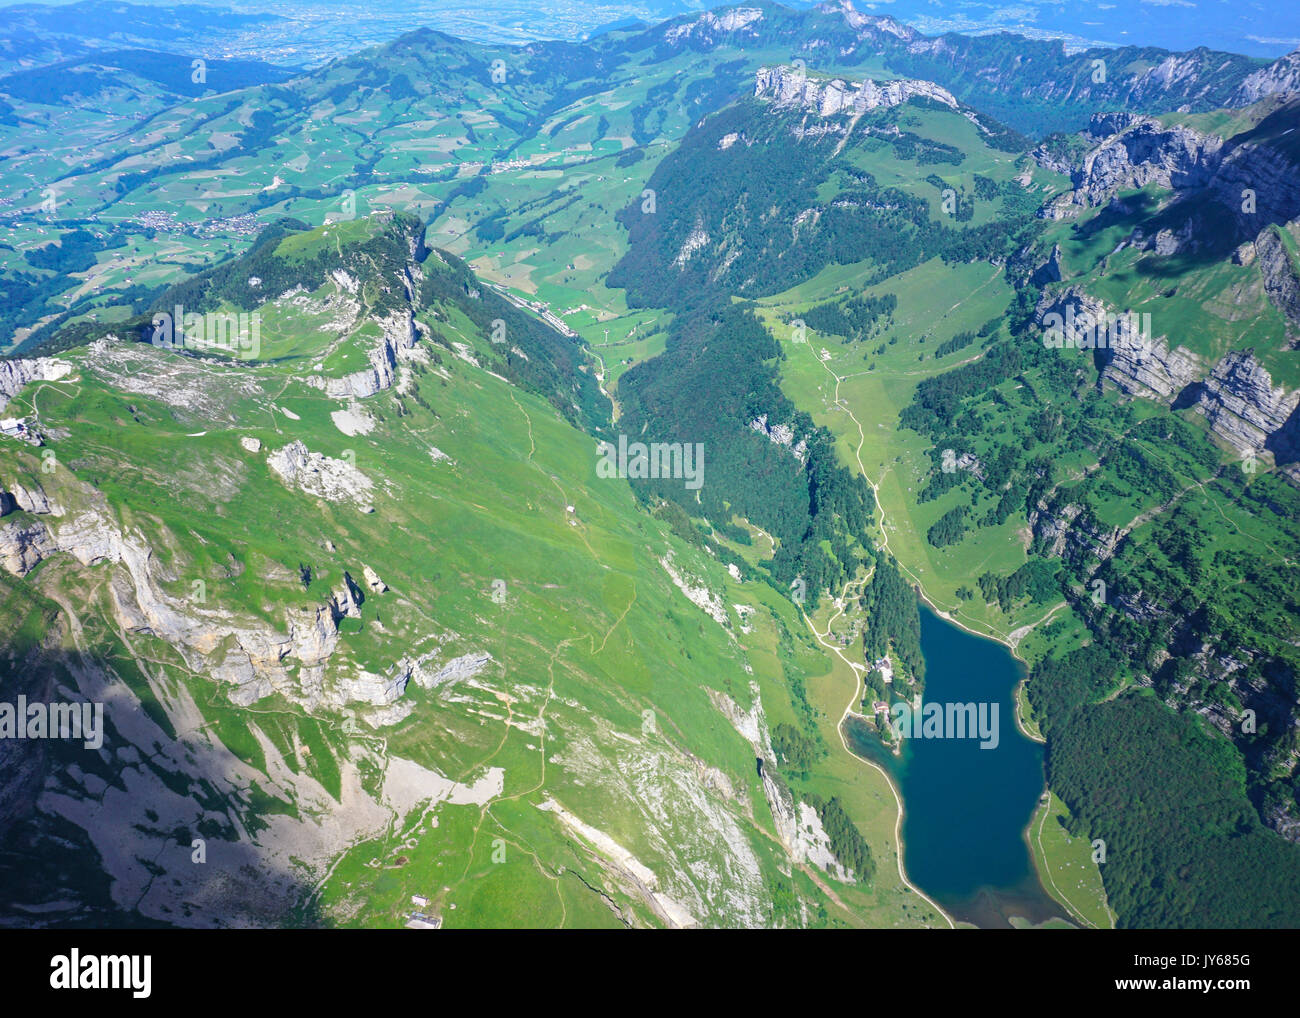 Luftbild Seealpsee und Ebenalp *** Local Caption *** Seealpsee, Appenzell, Alps, Mountain, Switzerland, Aerial View, aerial photography, from above, a Stock Photo